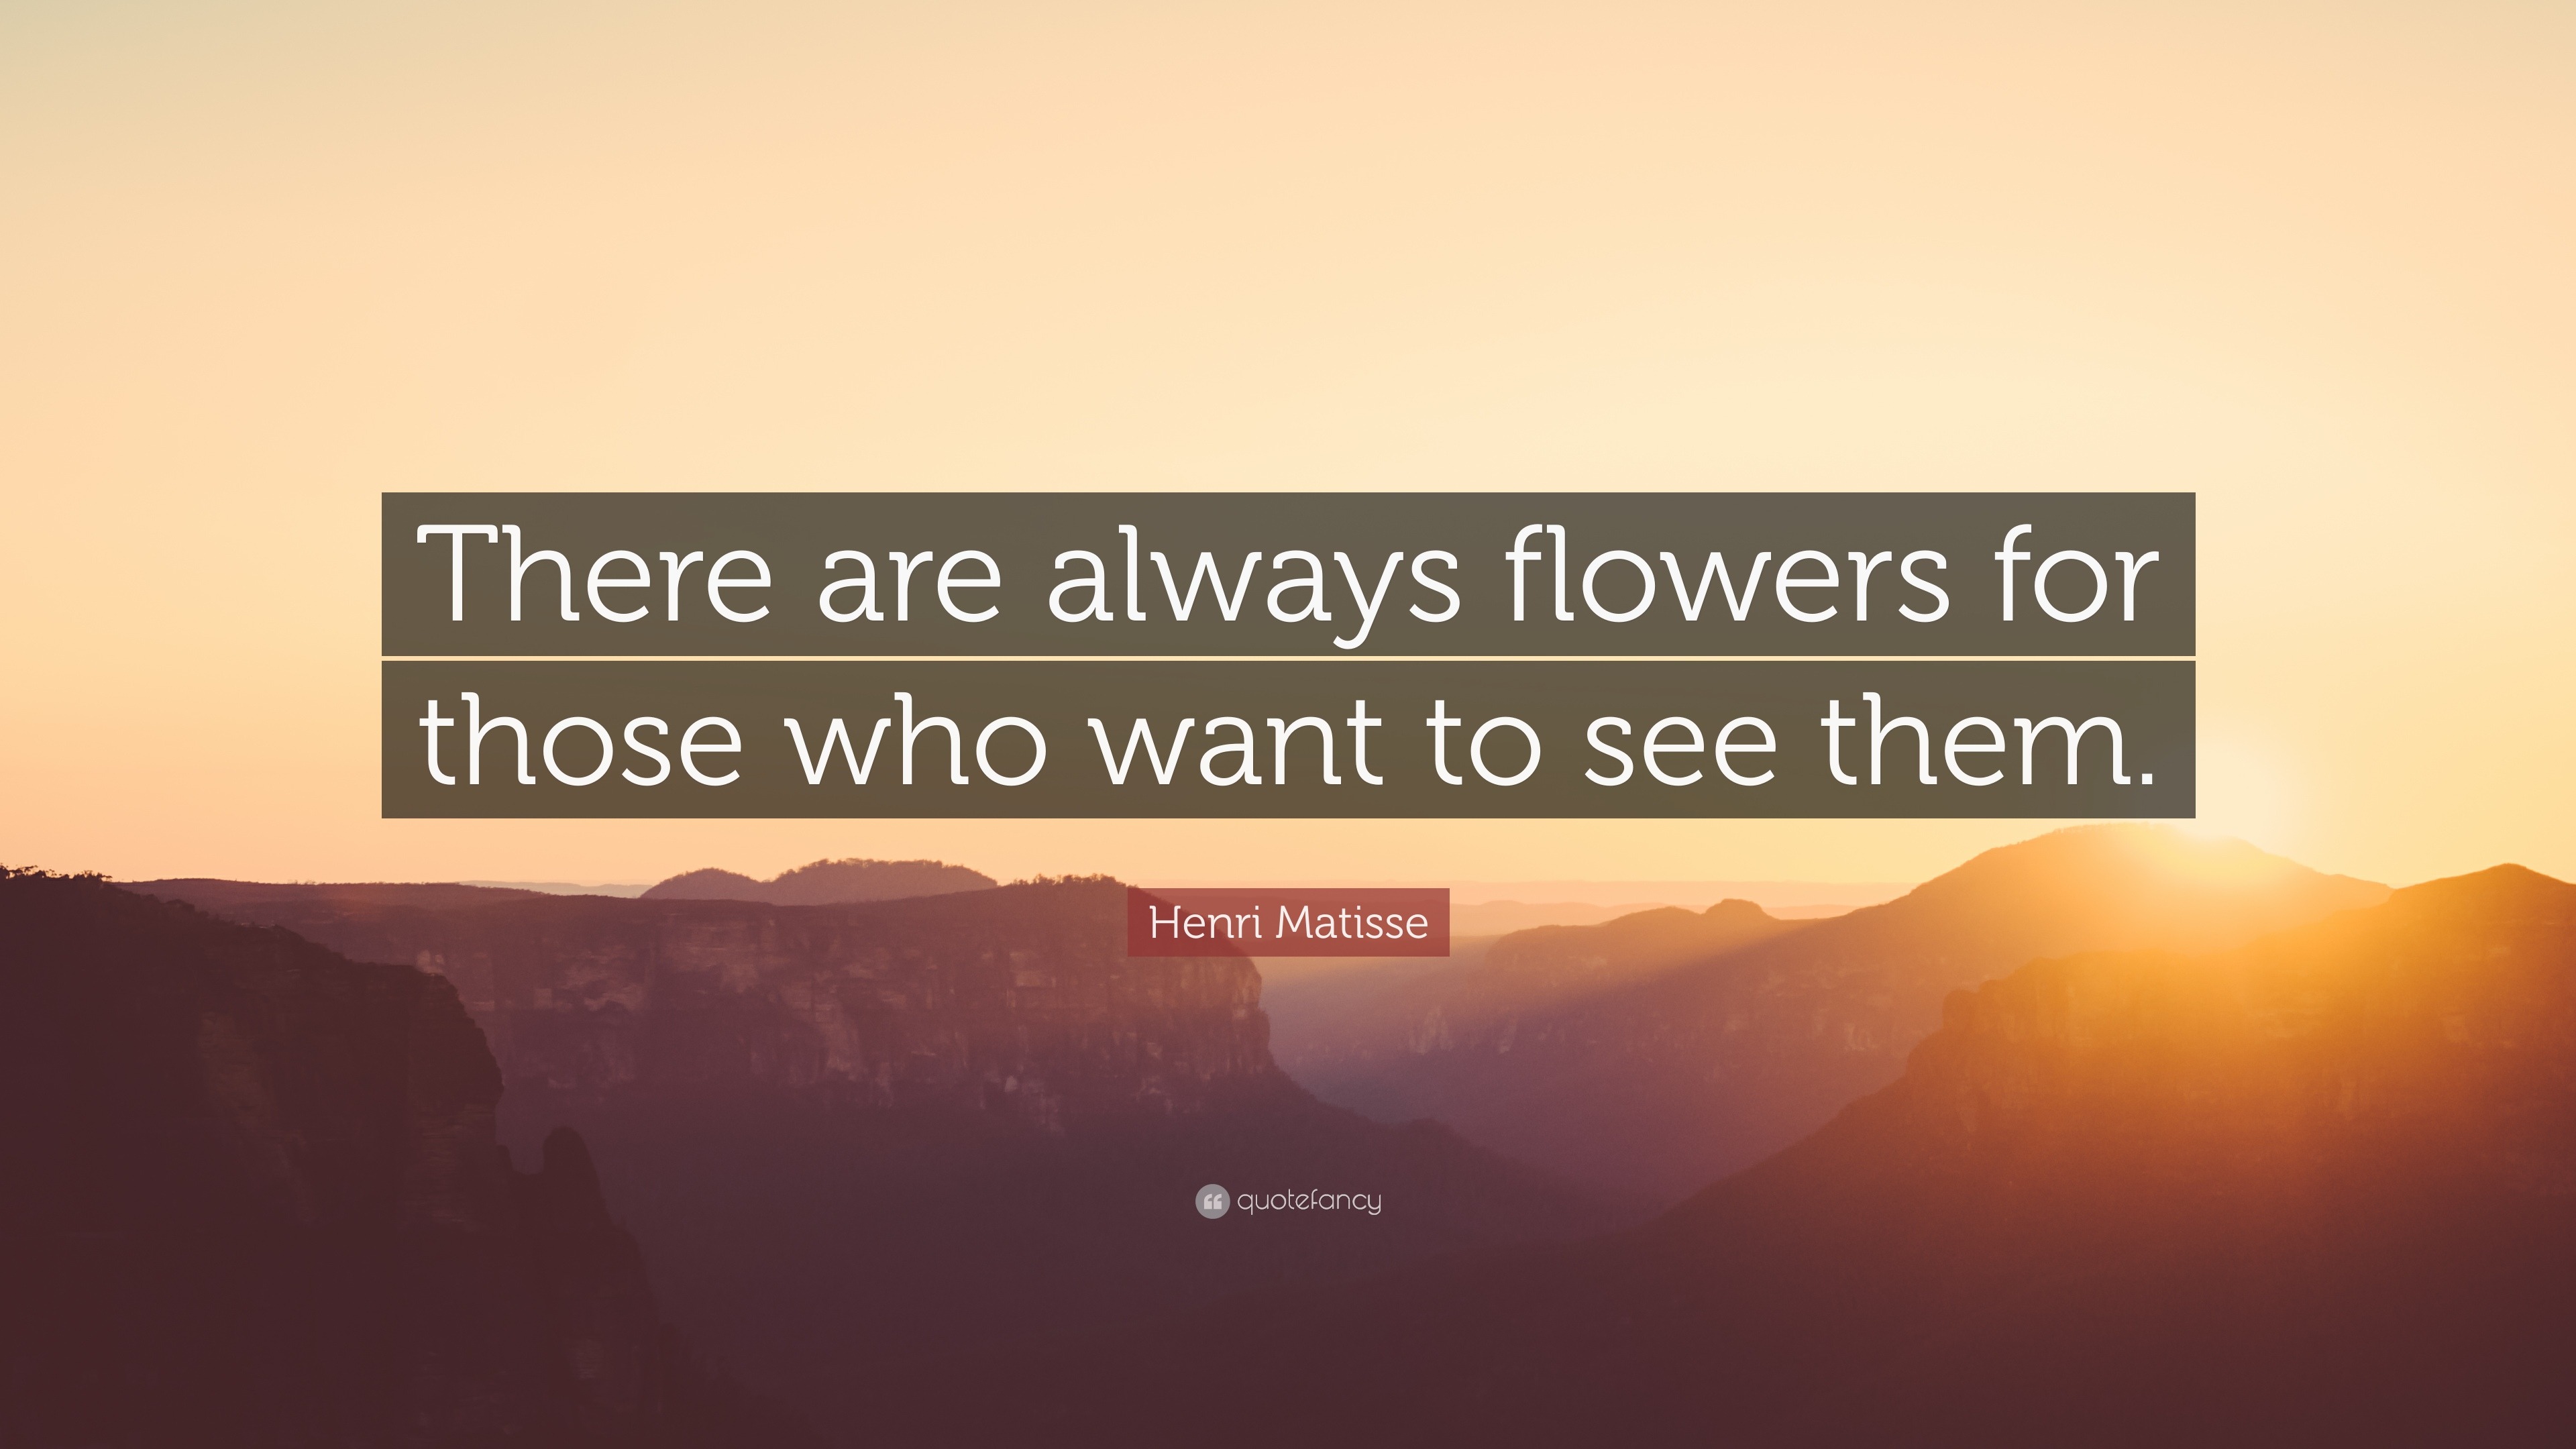 Henri Matisse Quote: “There are always flowers for those who want to